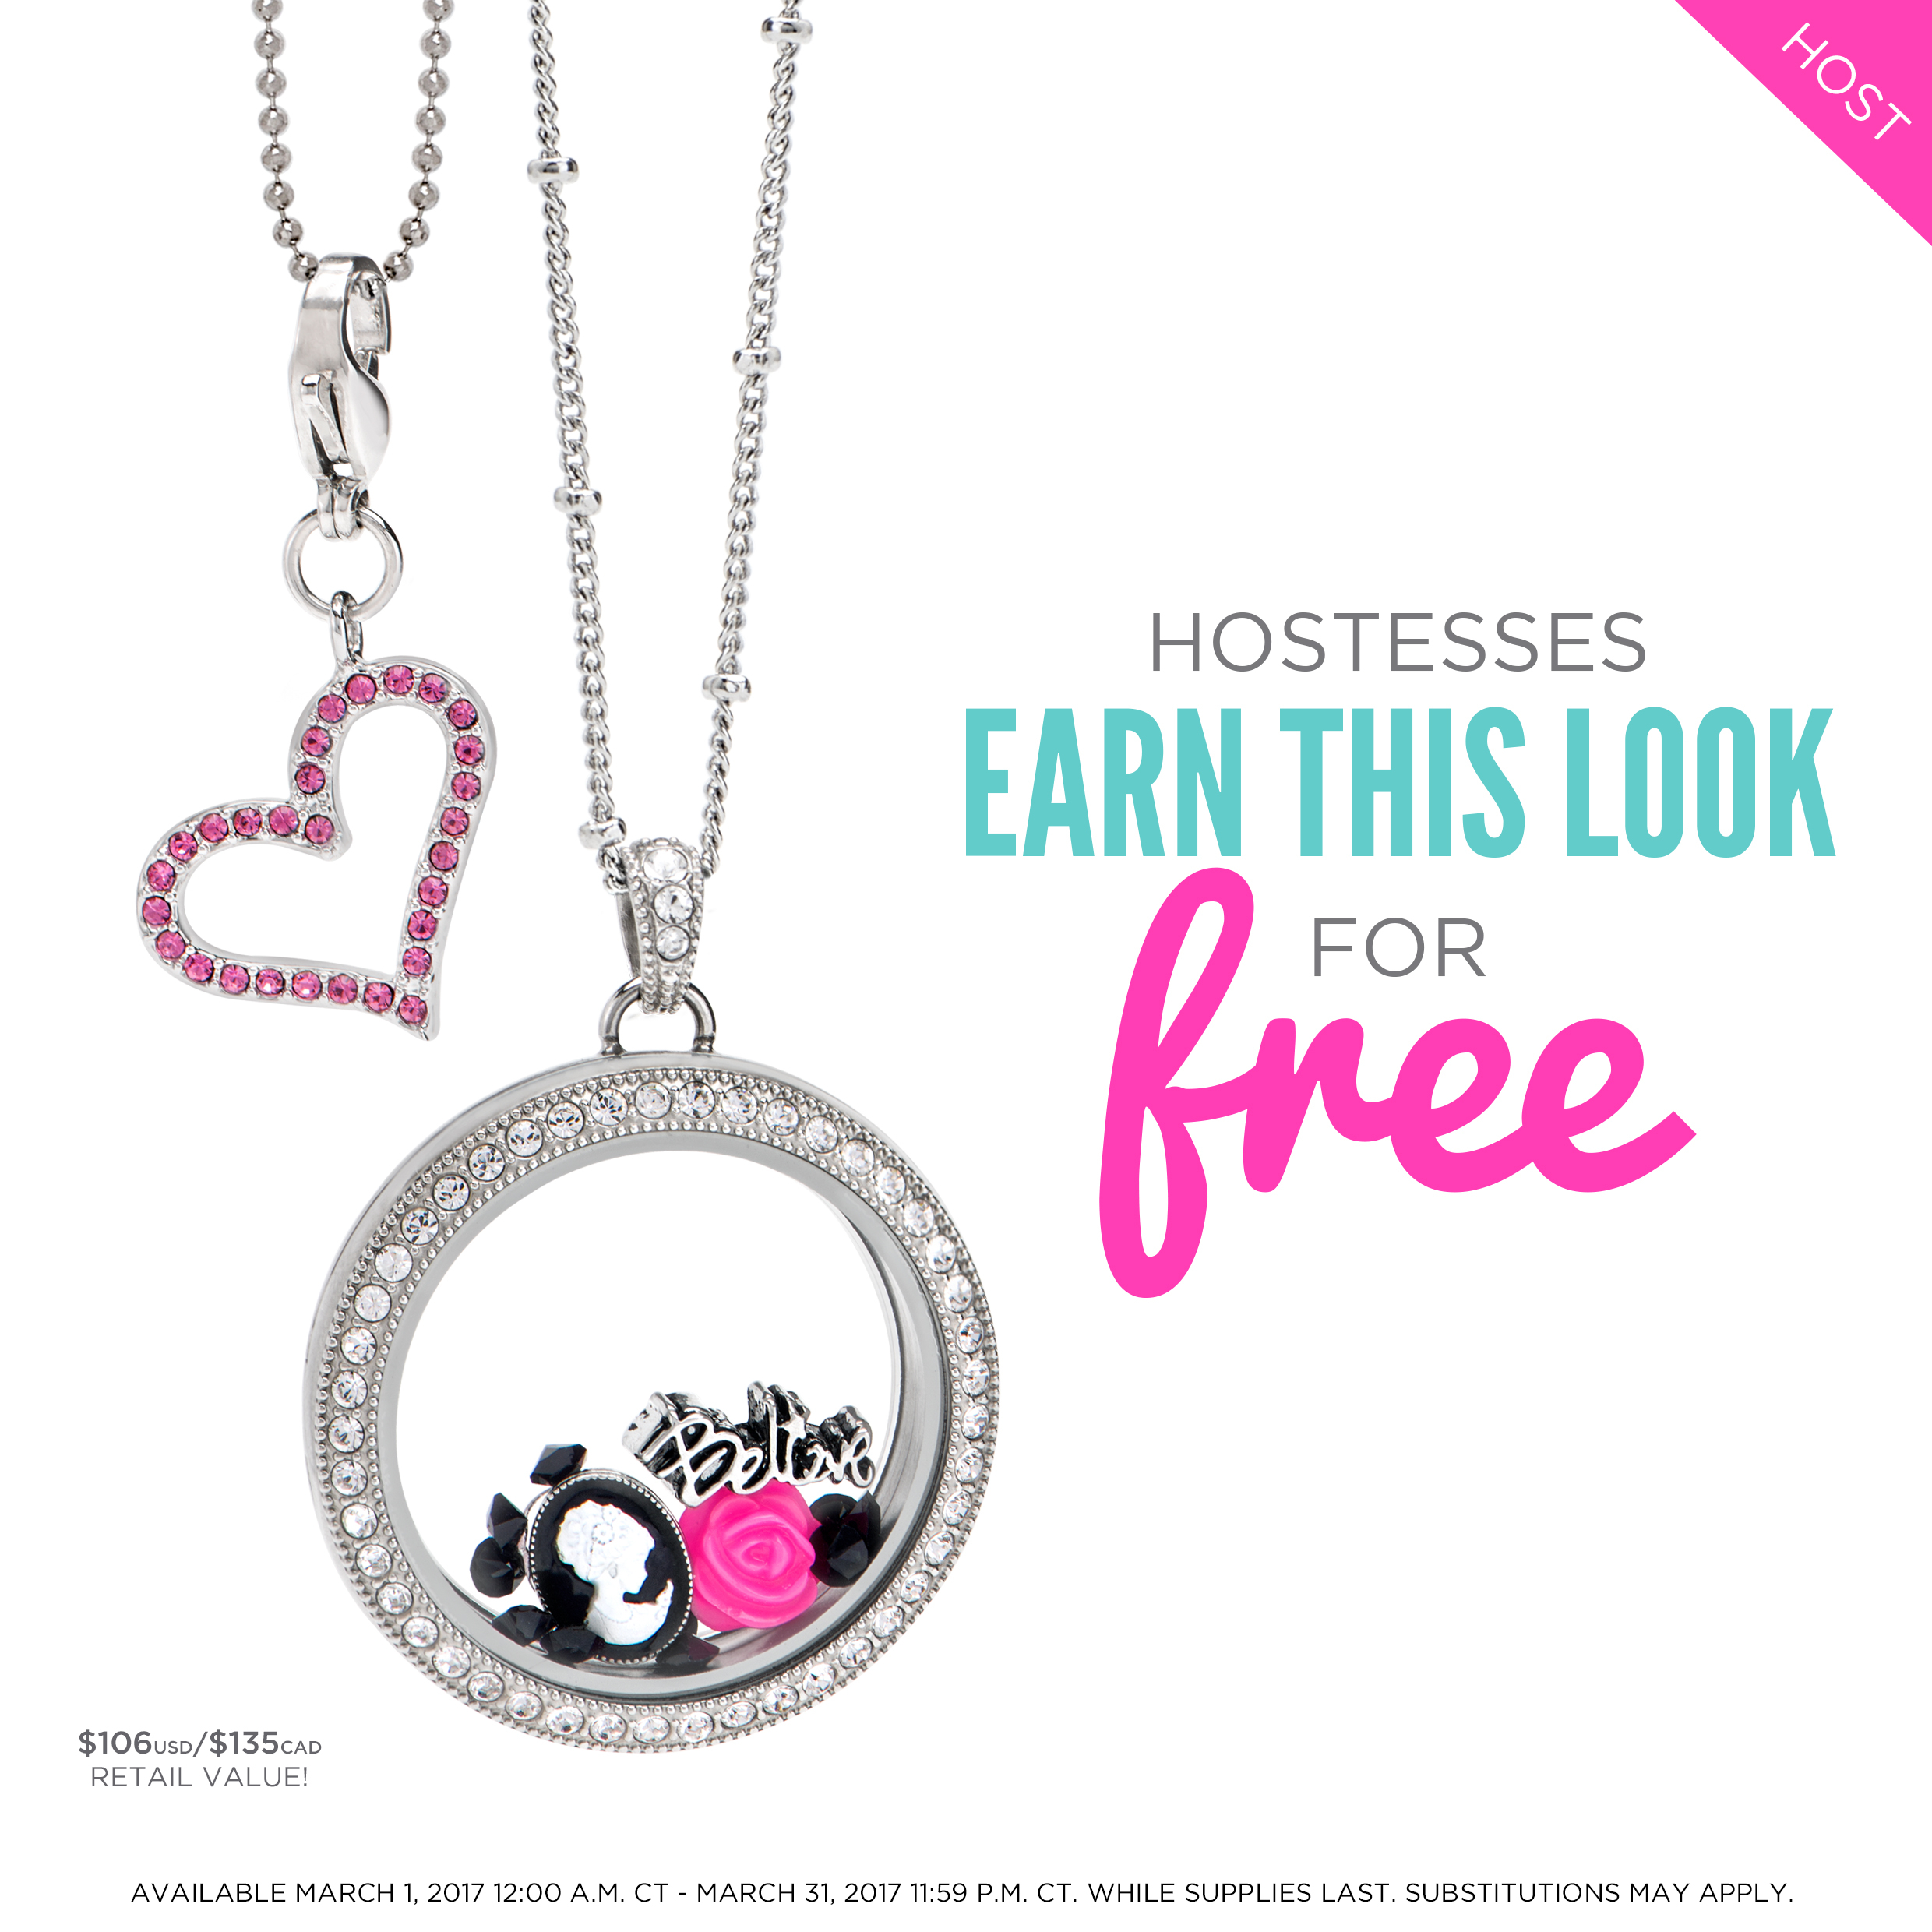 Origami Owl Over The Heart Chain Take A Peek At The March Hostess Exclusive Share It